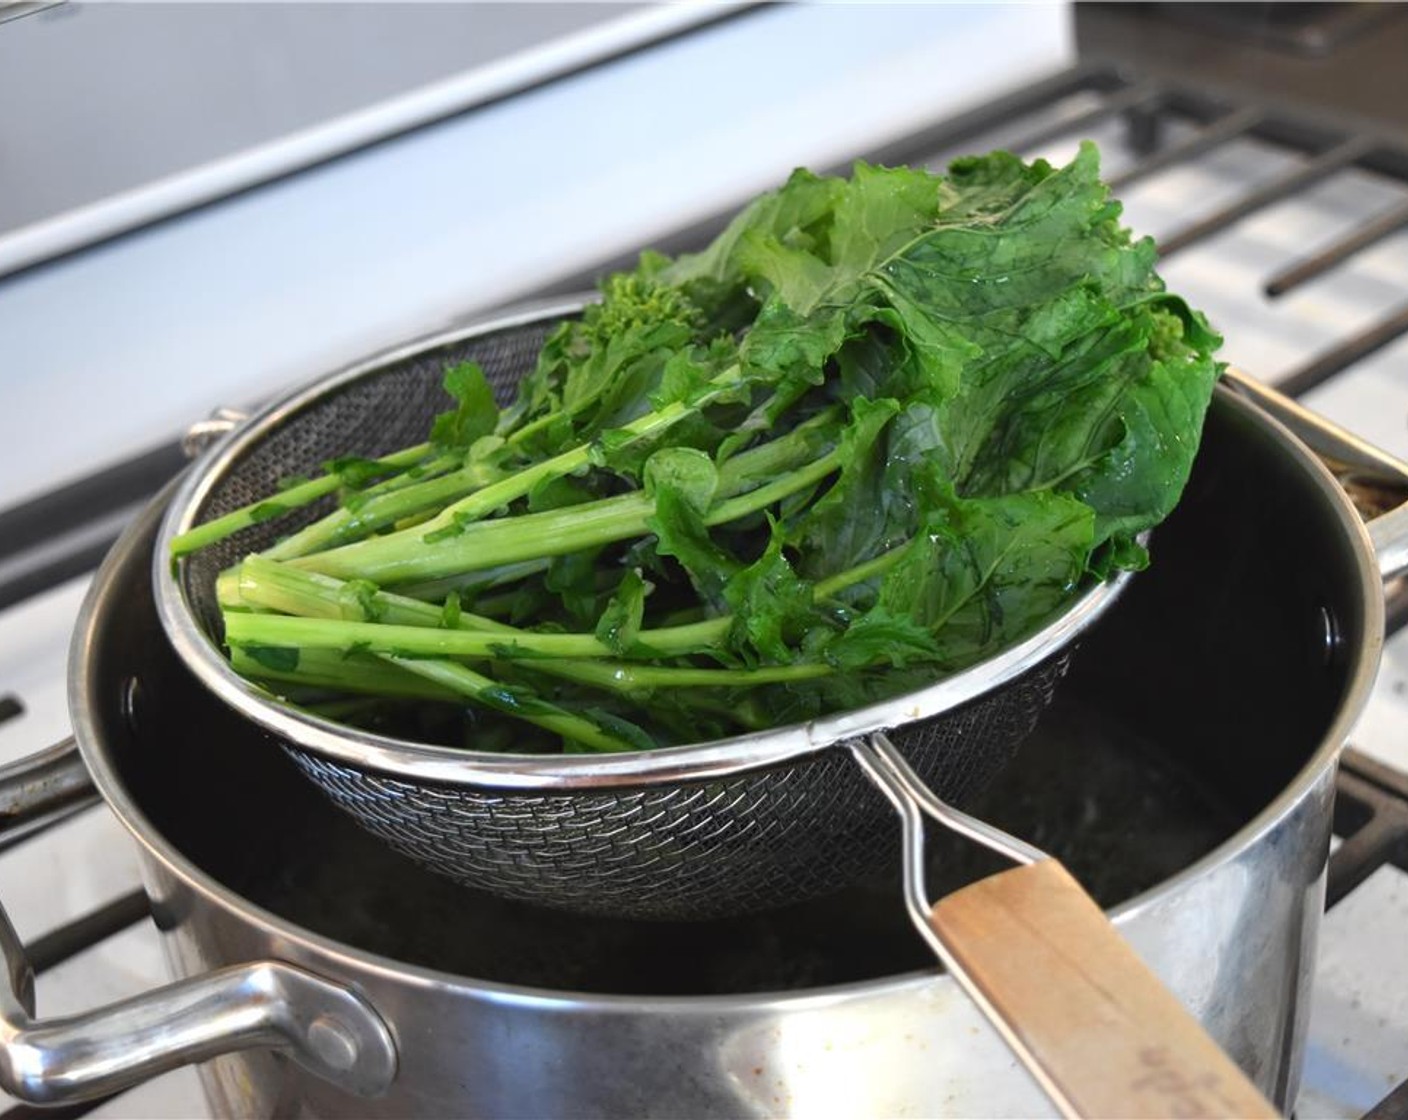 step 5 After 5 minutes, add the Broccoli Rabe (1 bunch) to the steamer, and steam for another 10 minutes.